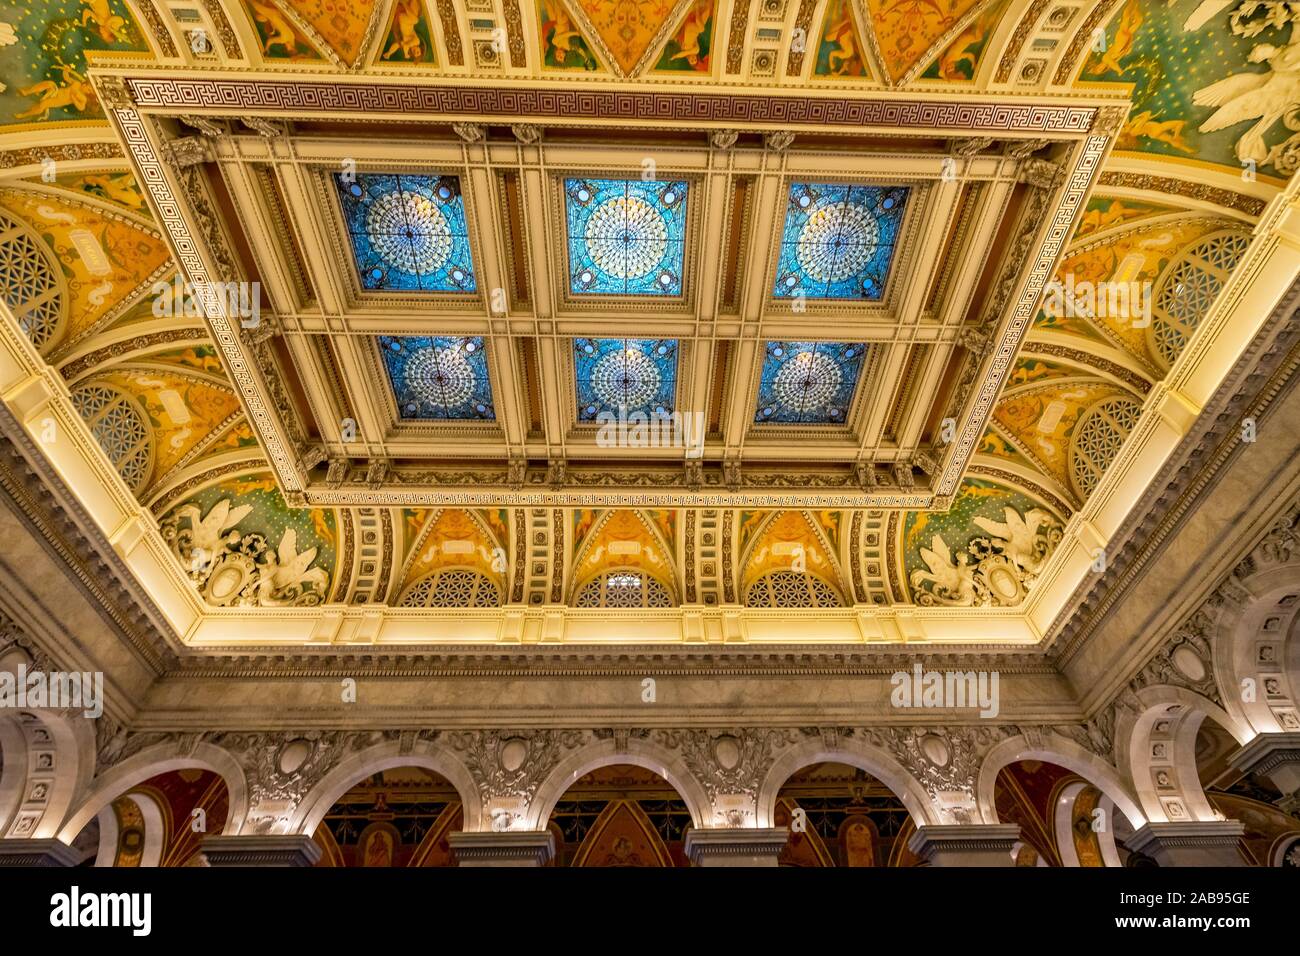 Thomas Jefferson Building Library of Congress Ornate Stained Glass ...